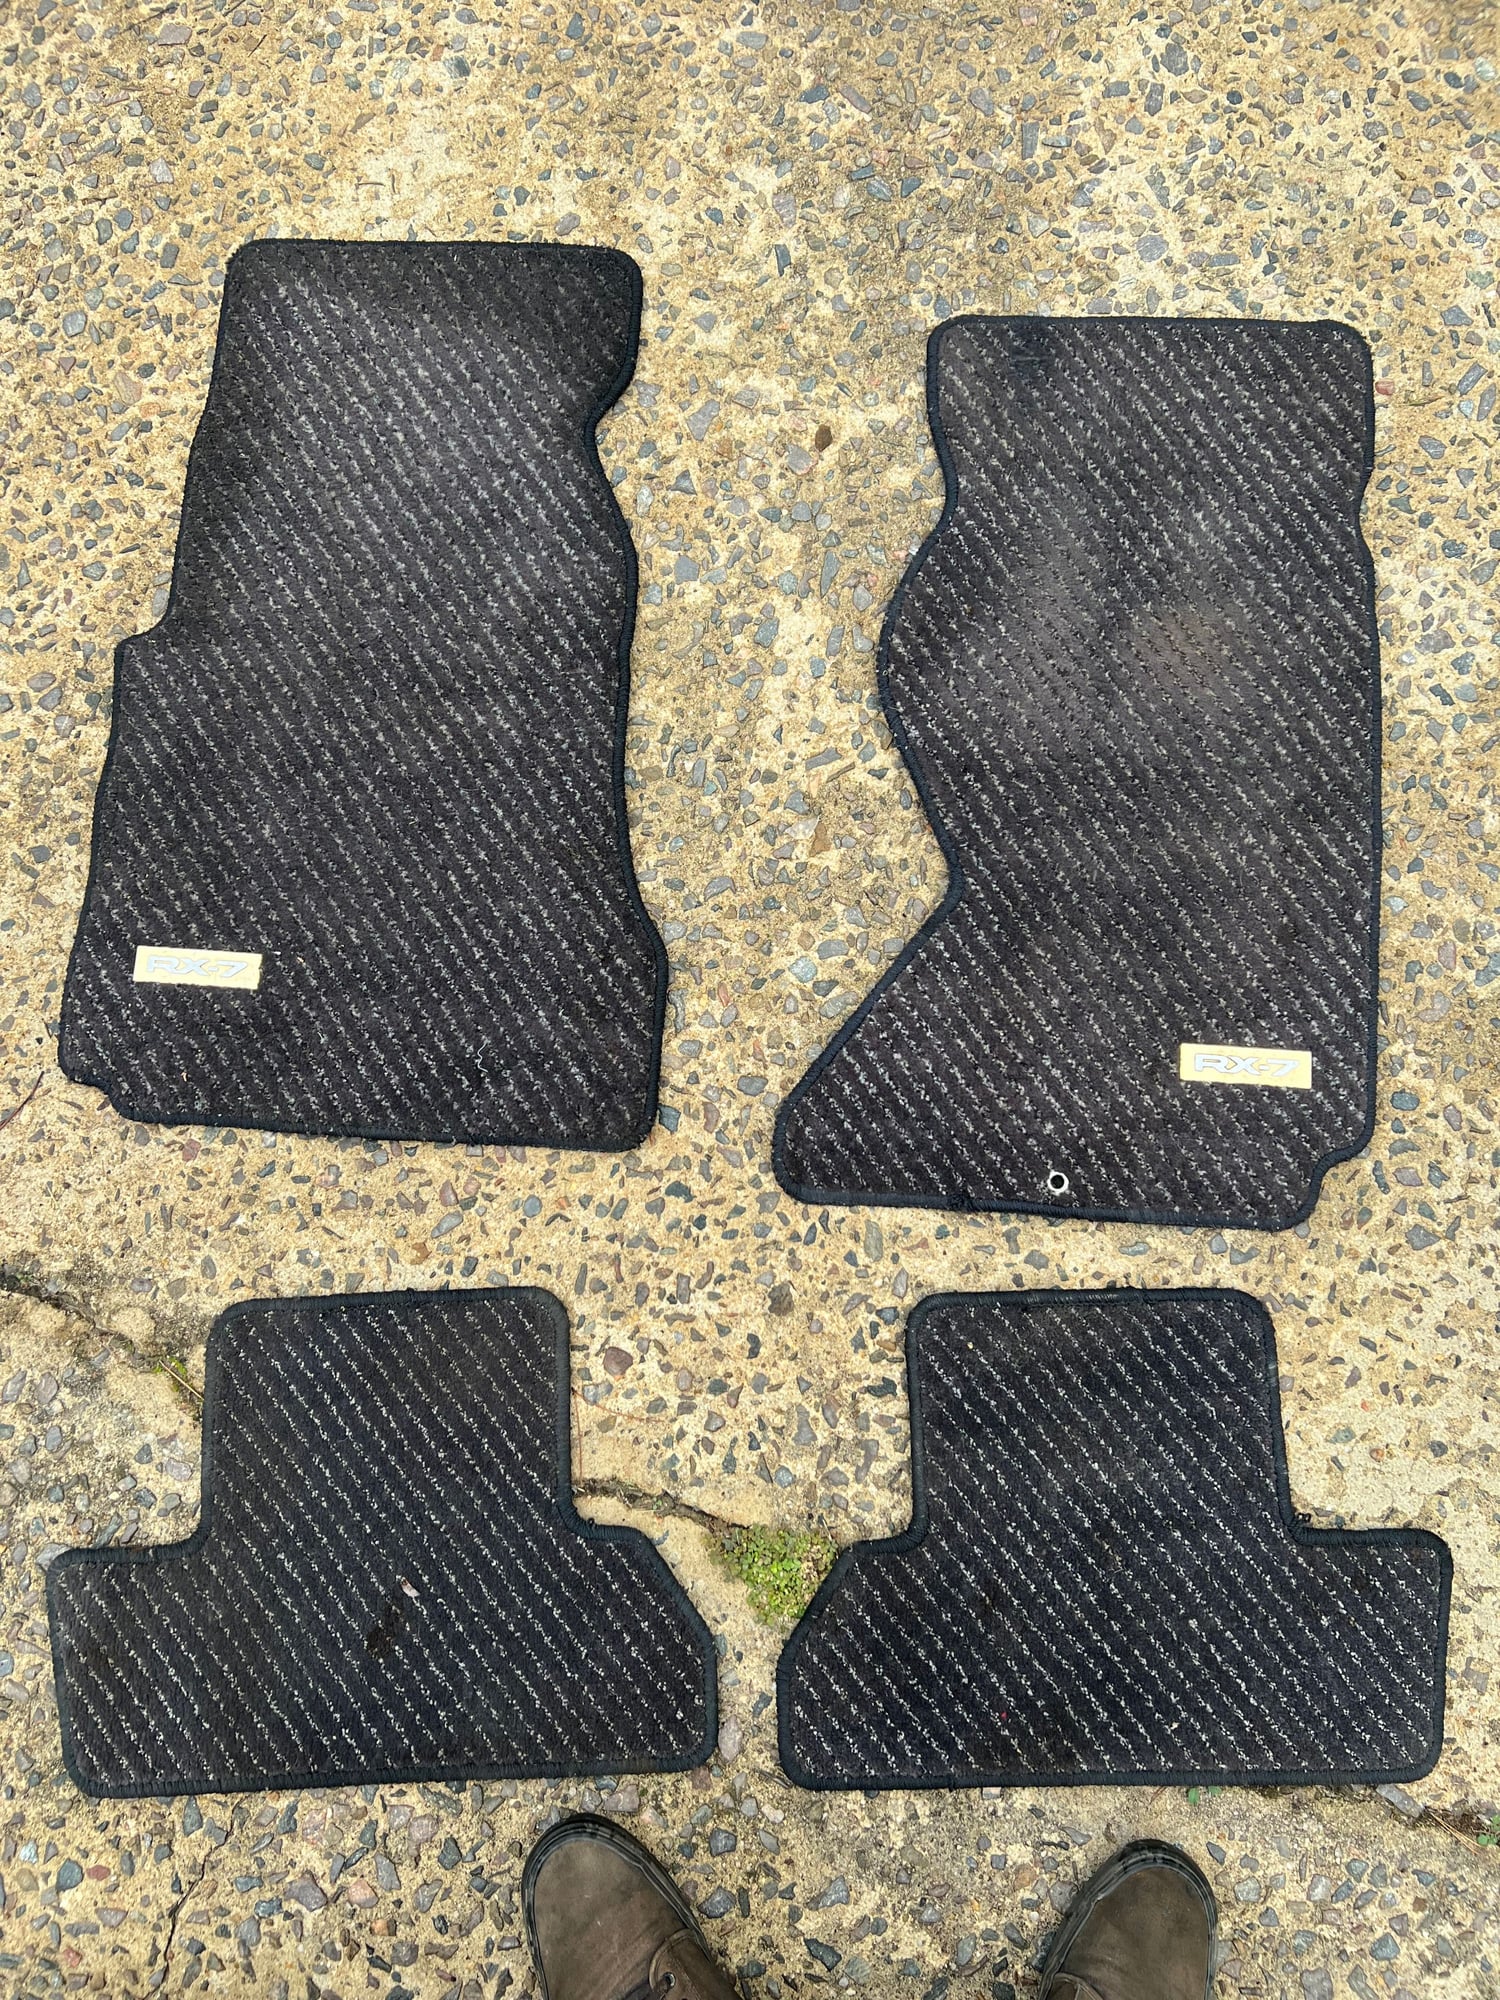 Miscellaneous - Ganador Exhaust and JDM Floor Mats - Used - 1993 to 2002 Mazda RX-7 - North Augusta, SC 29841, United States